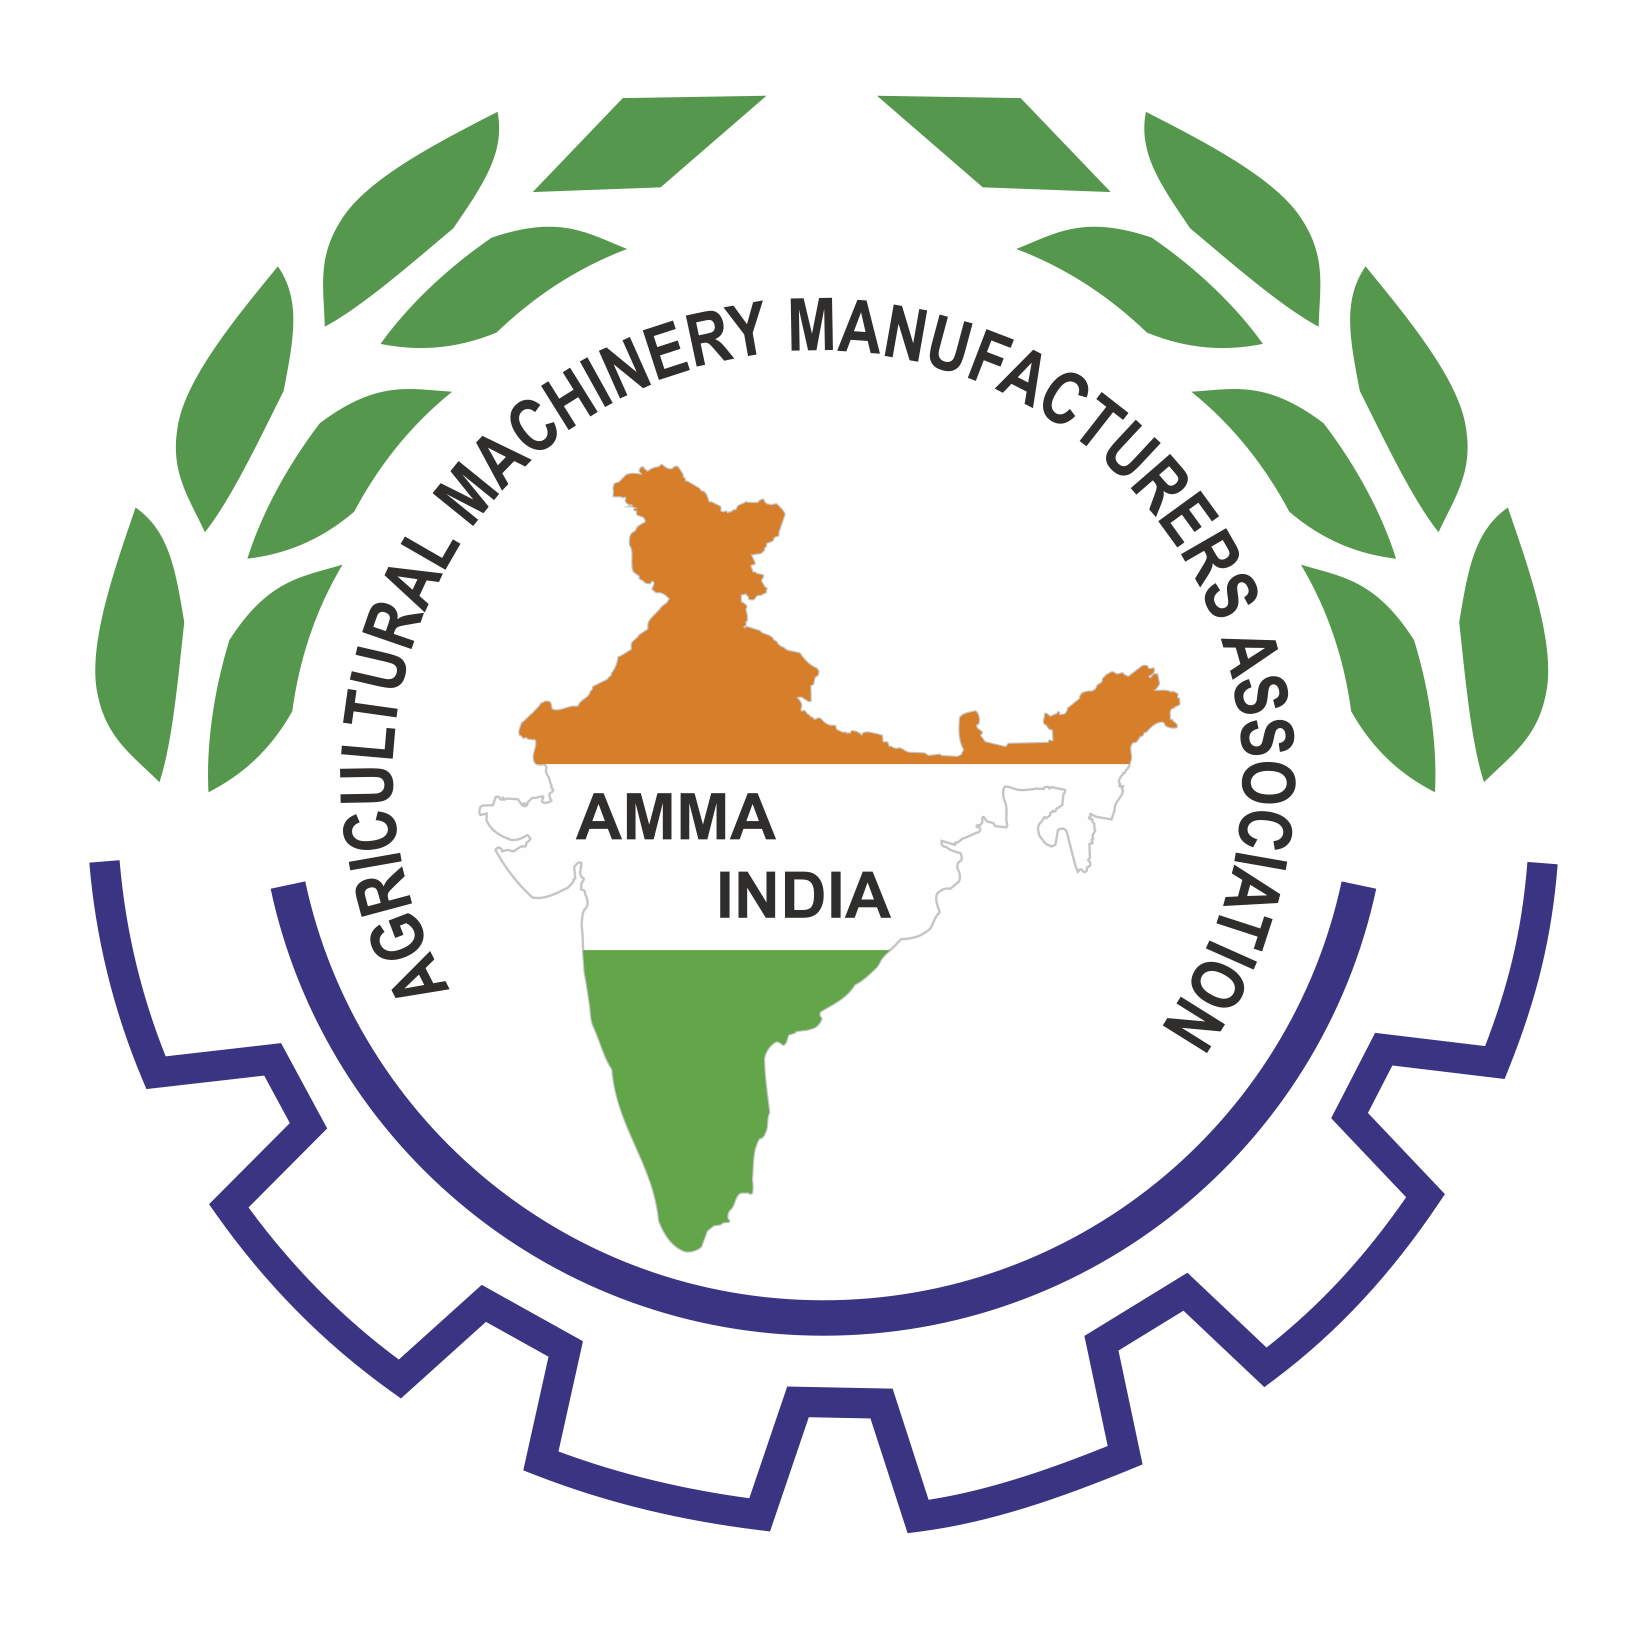 Agricultural Machinery Manufacturers' Association